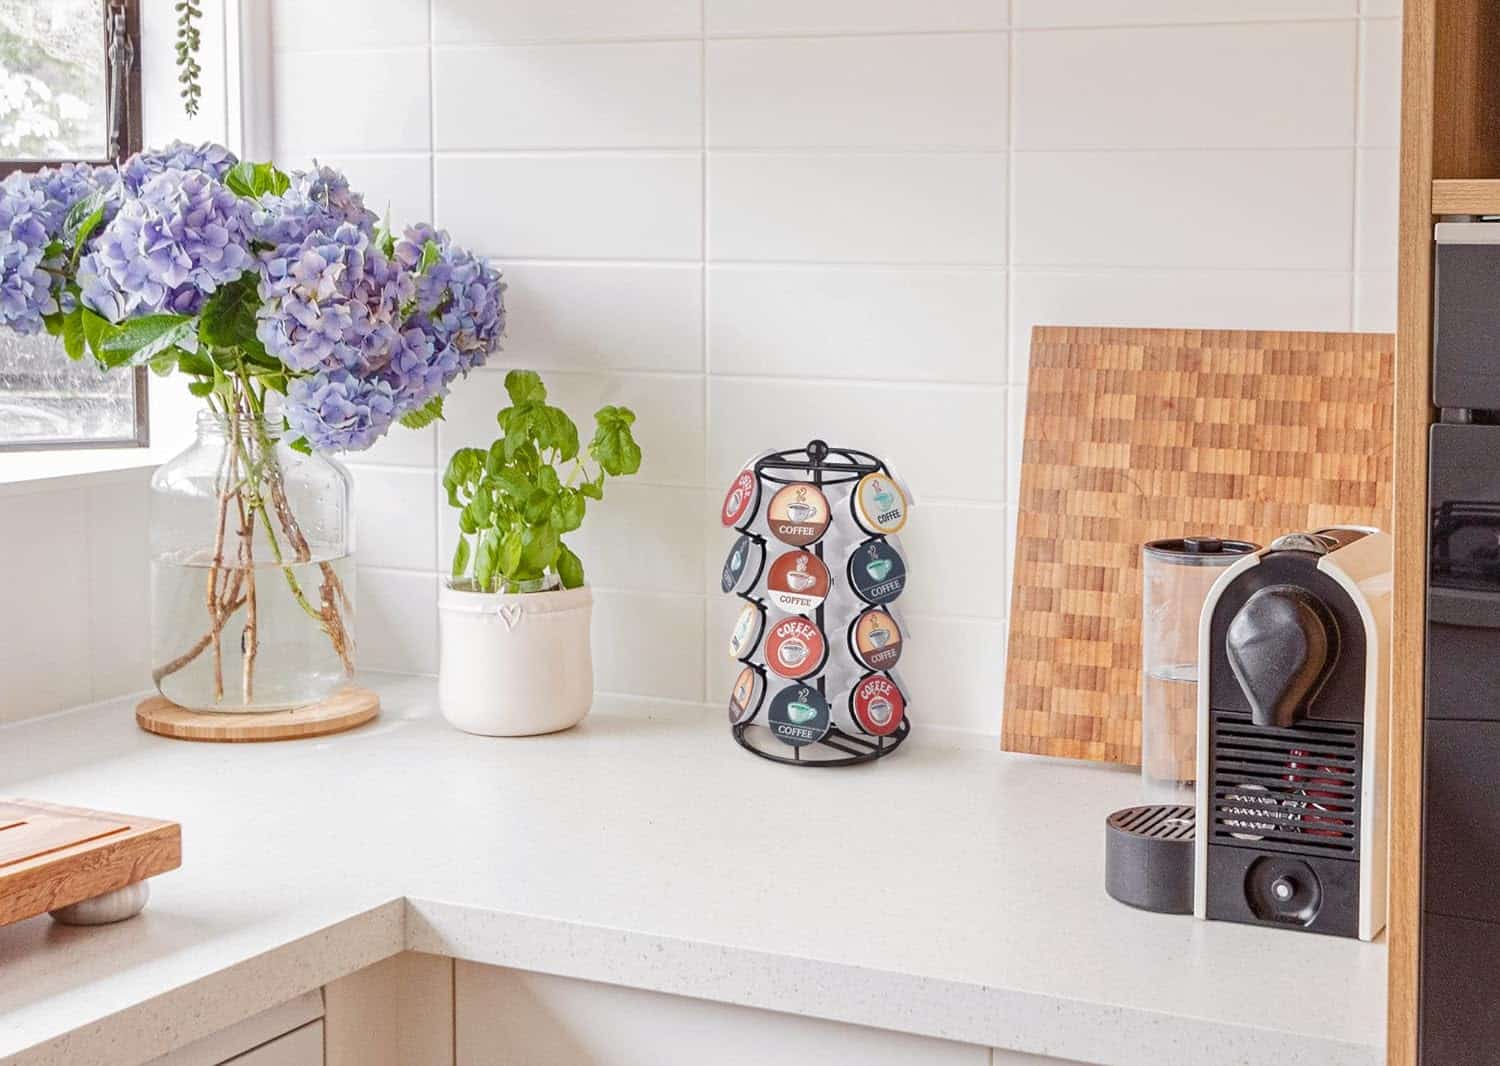 Nifty K Cup Holder - The Perfect Coffee Pod Carousel for Your Kitchen